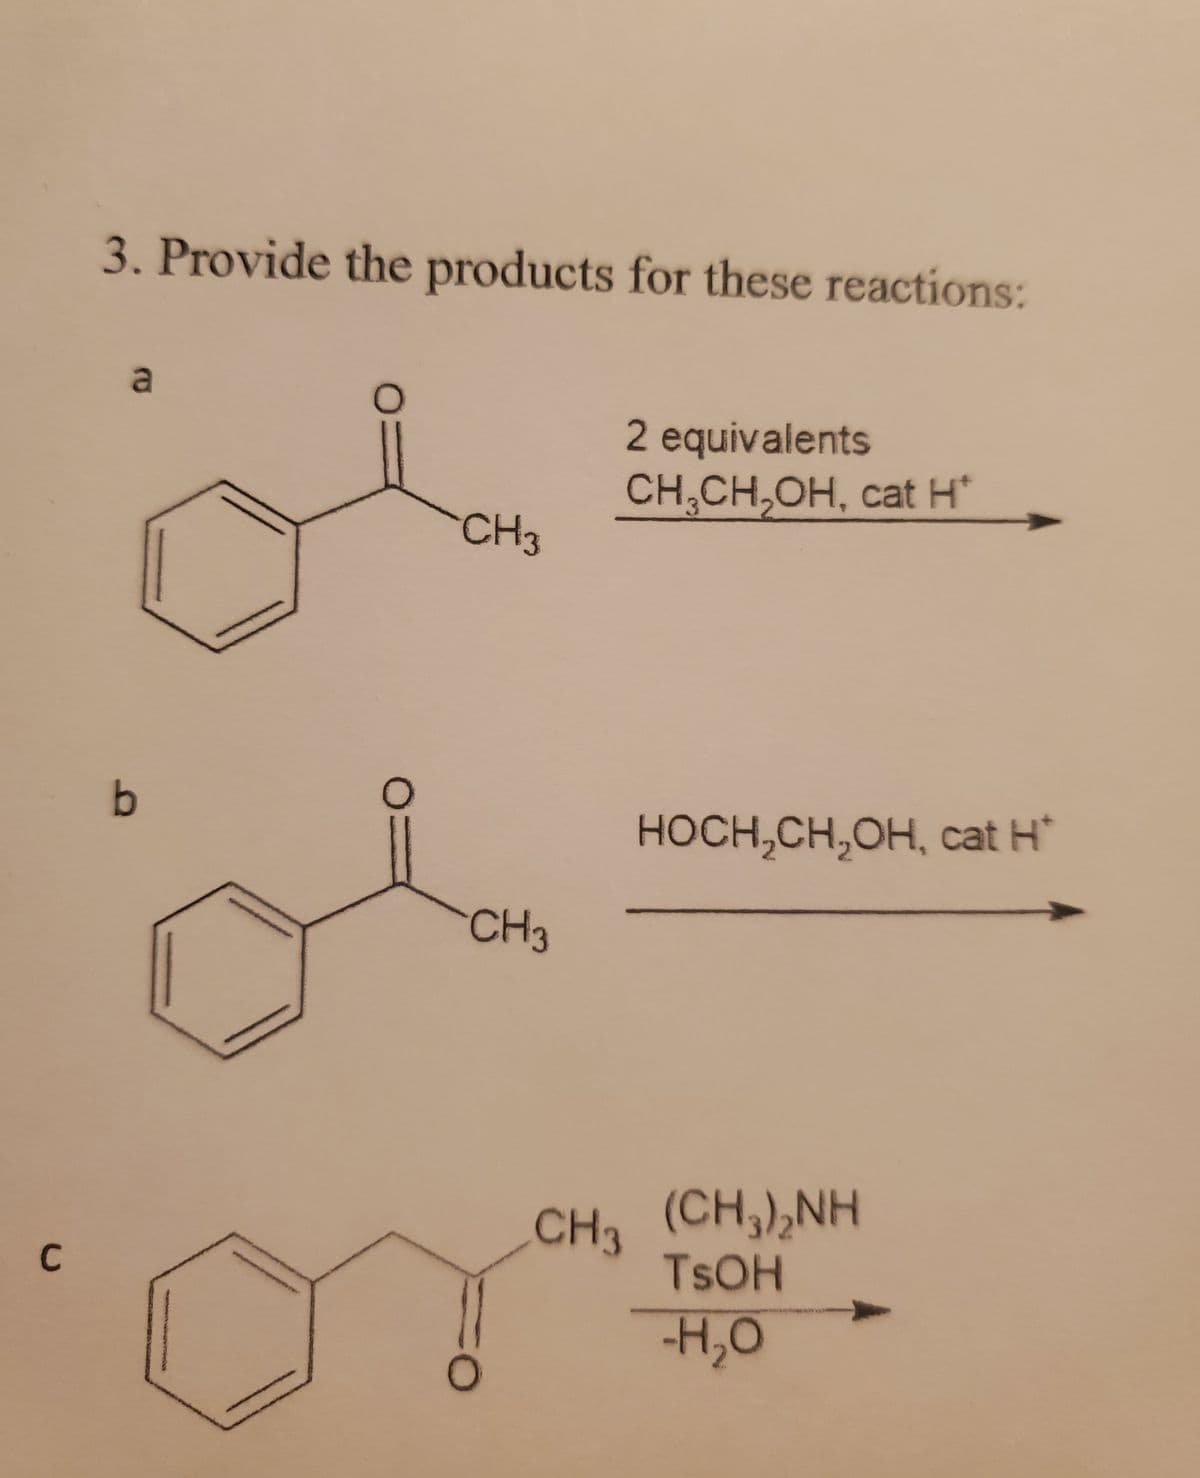 C
3. Provide the products for these reactions:
a
b
O
CH3
CH3
FO
2 equivalents
CH₂CH₂OH, cat H*
HOCH₂CH₂OH, cat H*
CH, (CH,),NH
TSOH
-H₂O